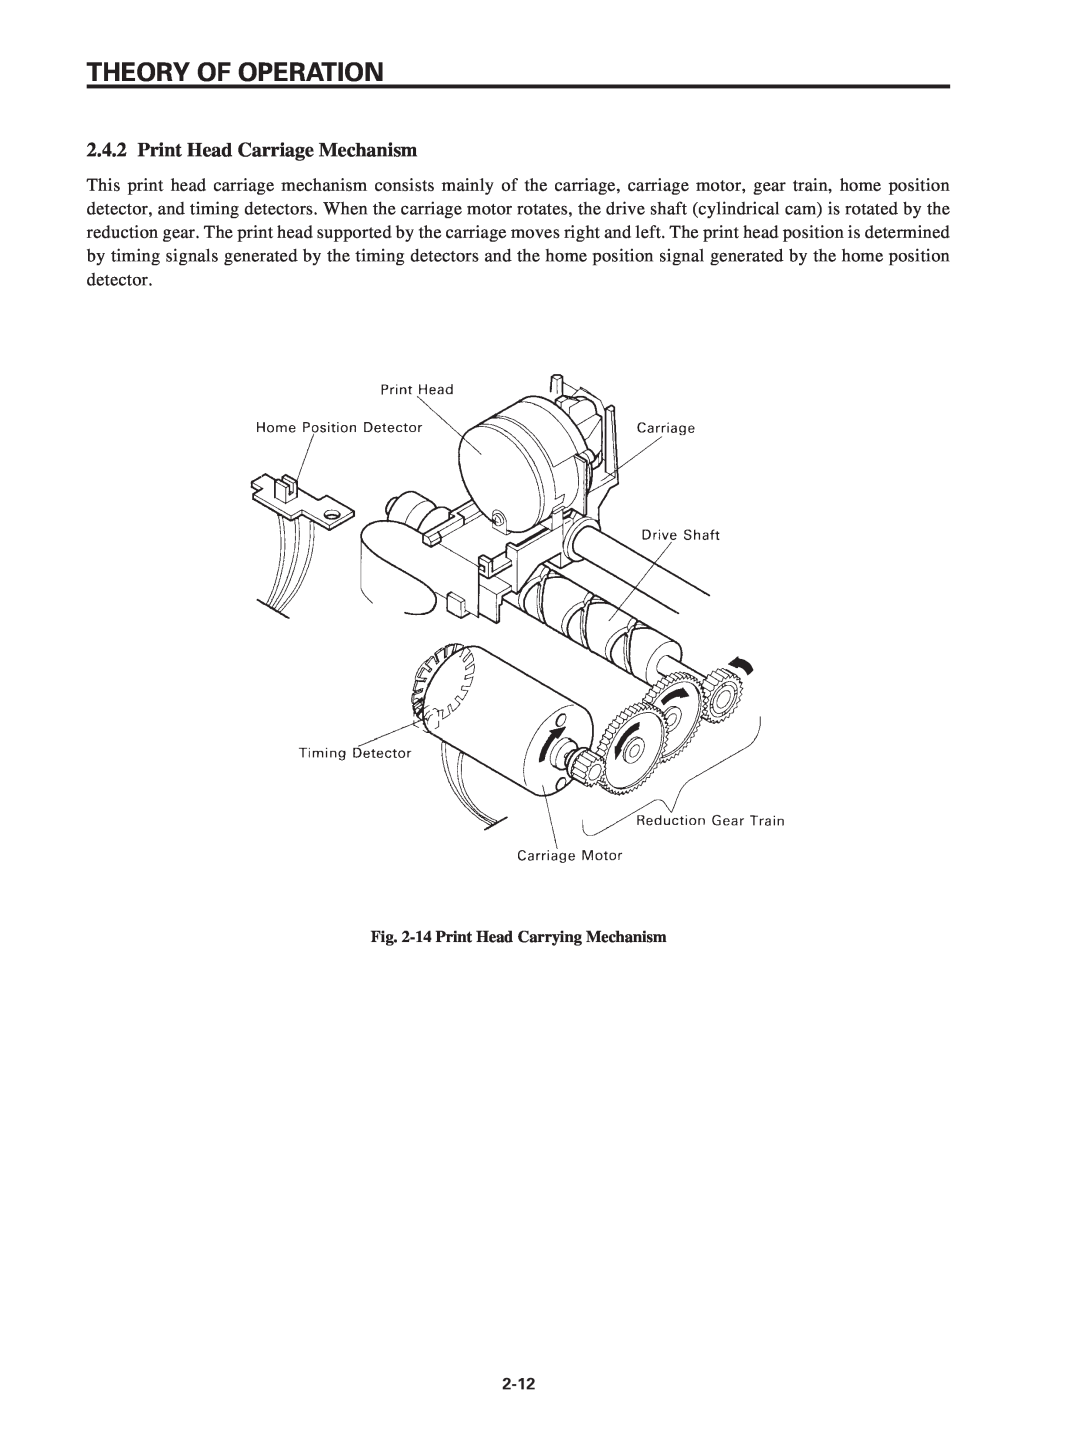 Star Micronics SP320S technical manual Theory Of Operation, Print Head Carriage Mechanism 